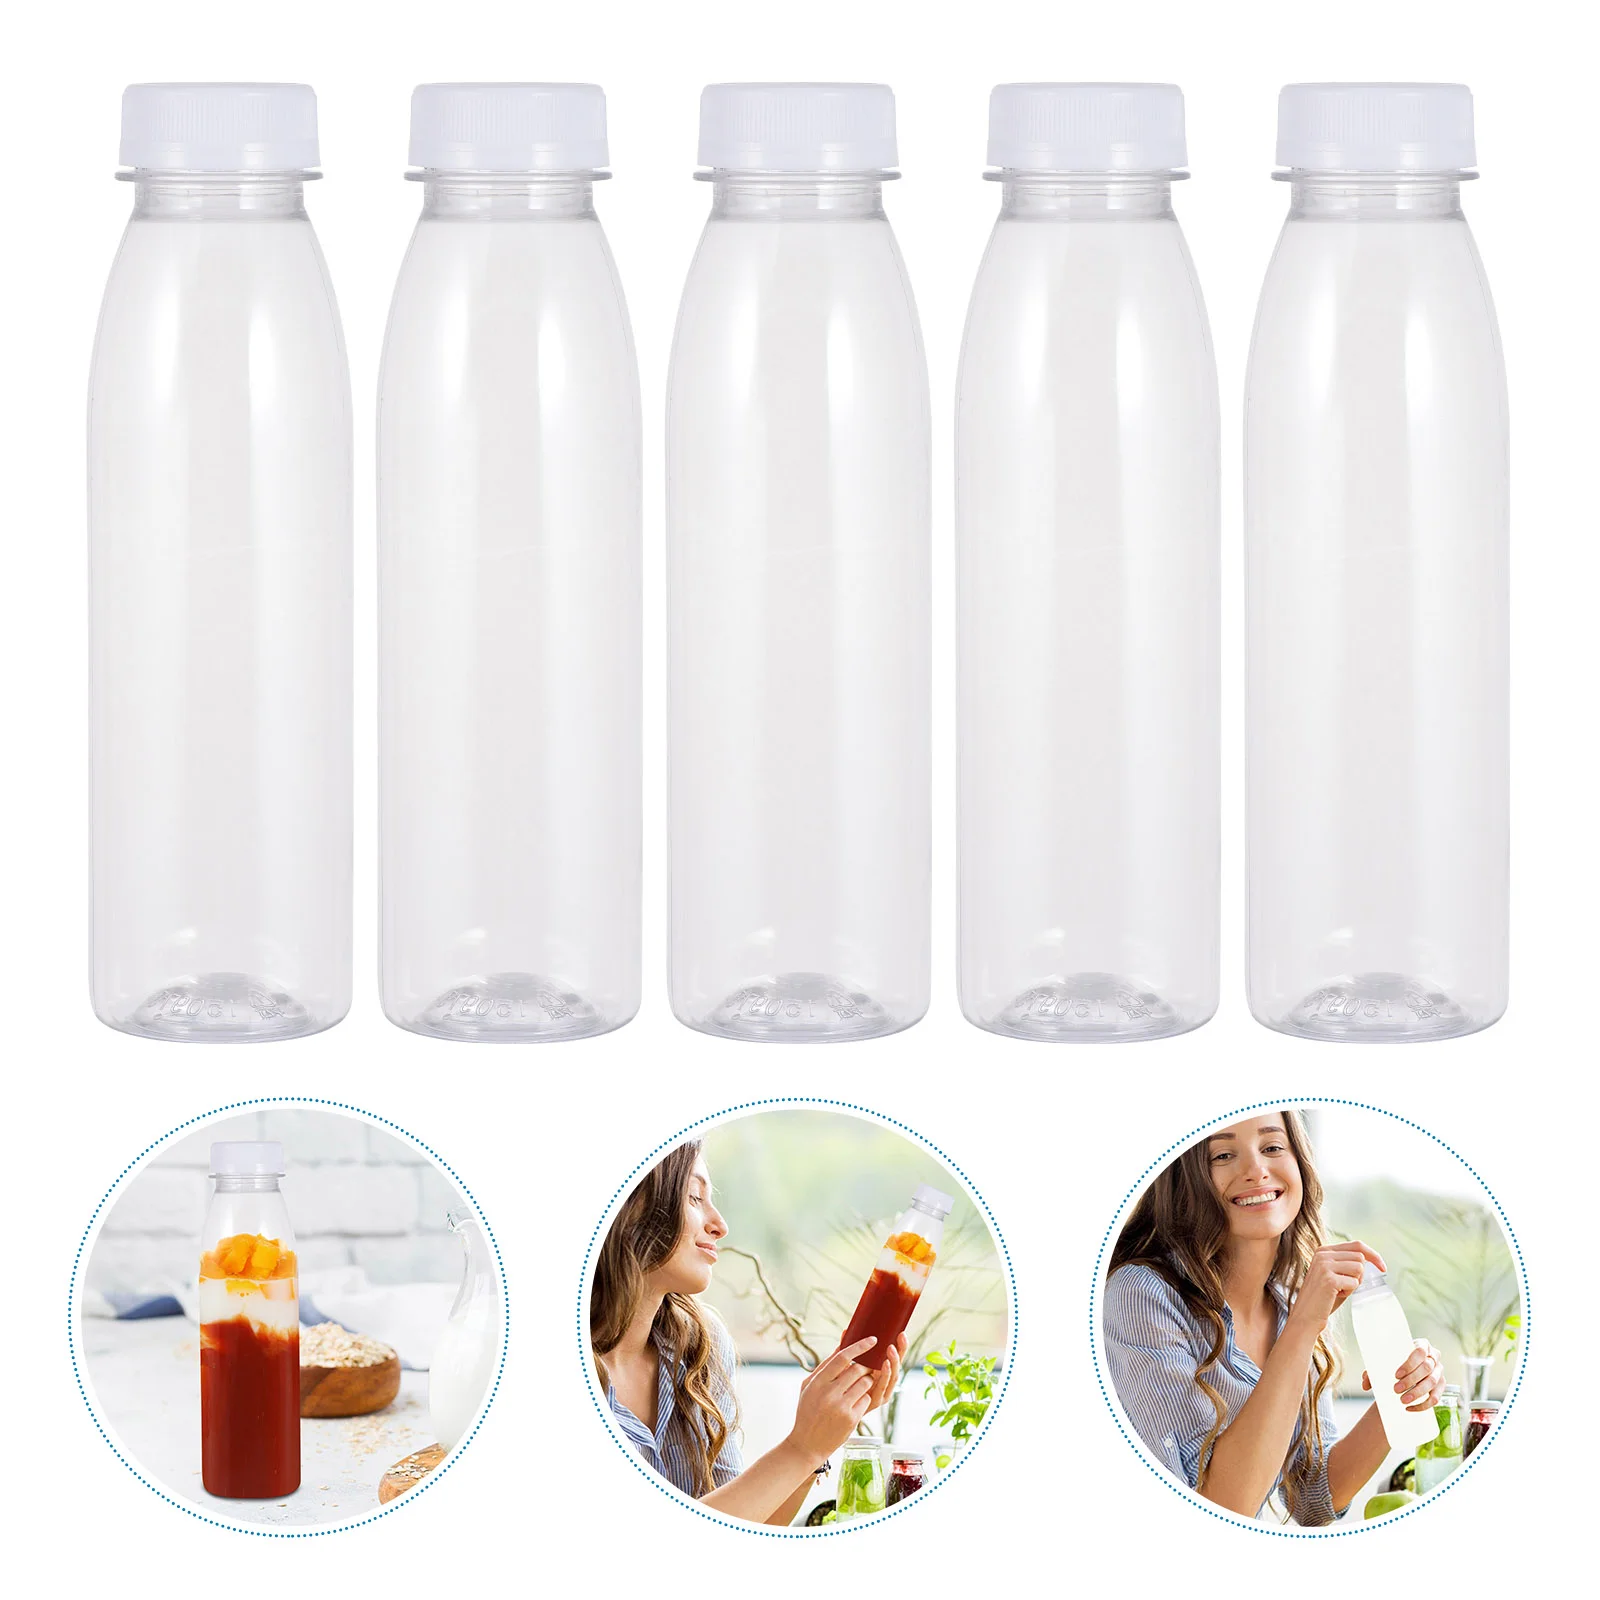 Bottles Plastic Milk Empty Clear Lids Beverage Reusable Bottle Containers Container Water Smoothie Drink Jug Pouches Party Bulk